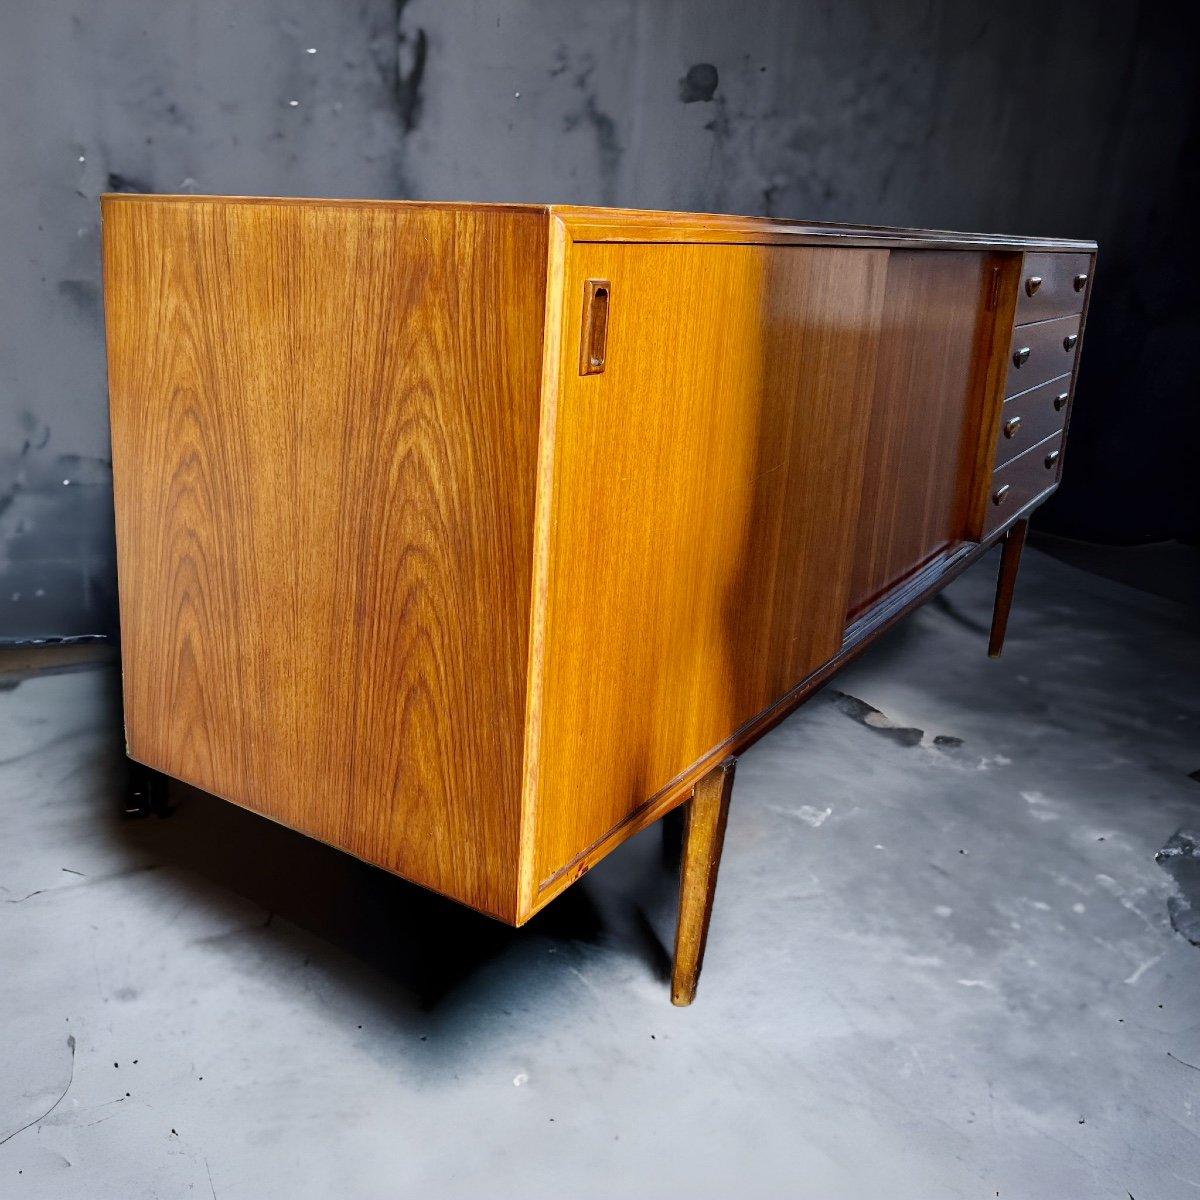 This very spacious and stylish vintage sideboard hailing from the 1960s boasts an authentic teak veneer finish in warm golden brown. It features two sliding doors that open to provide ample storage space despite its very light visual impression. On